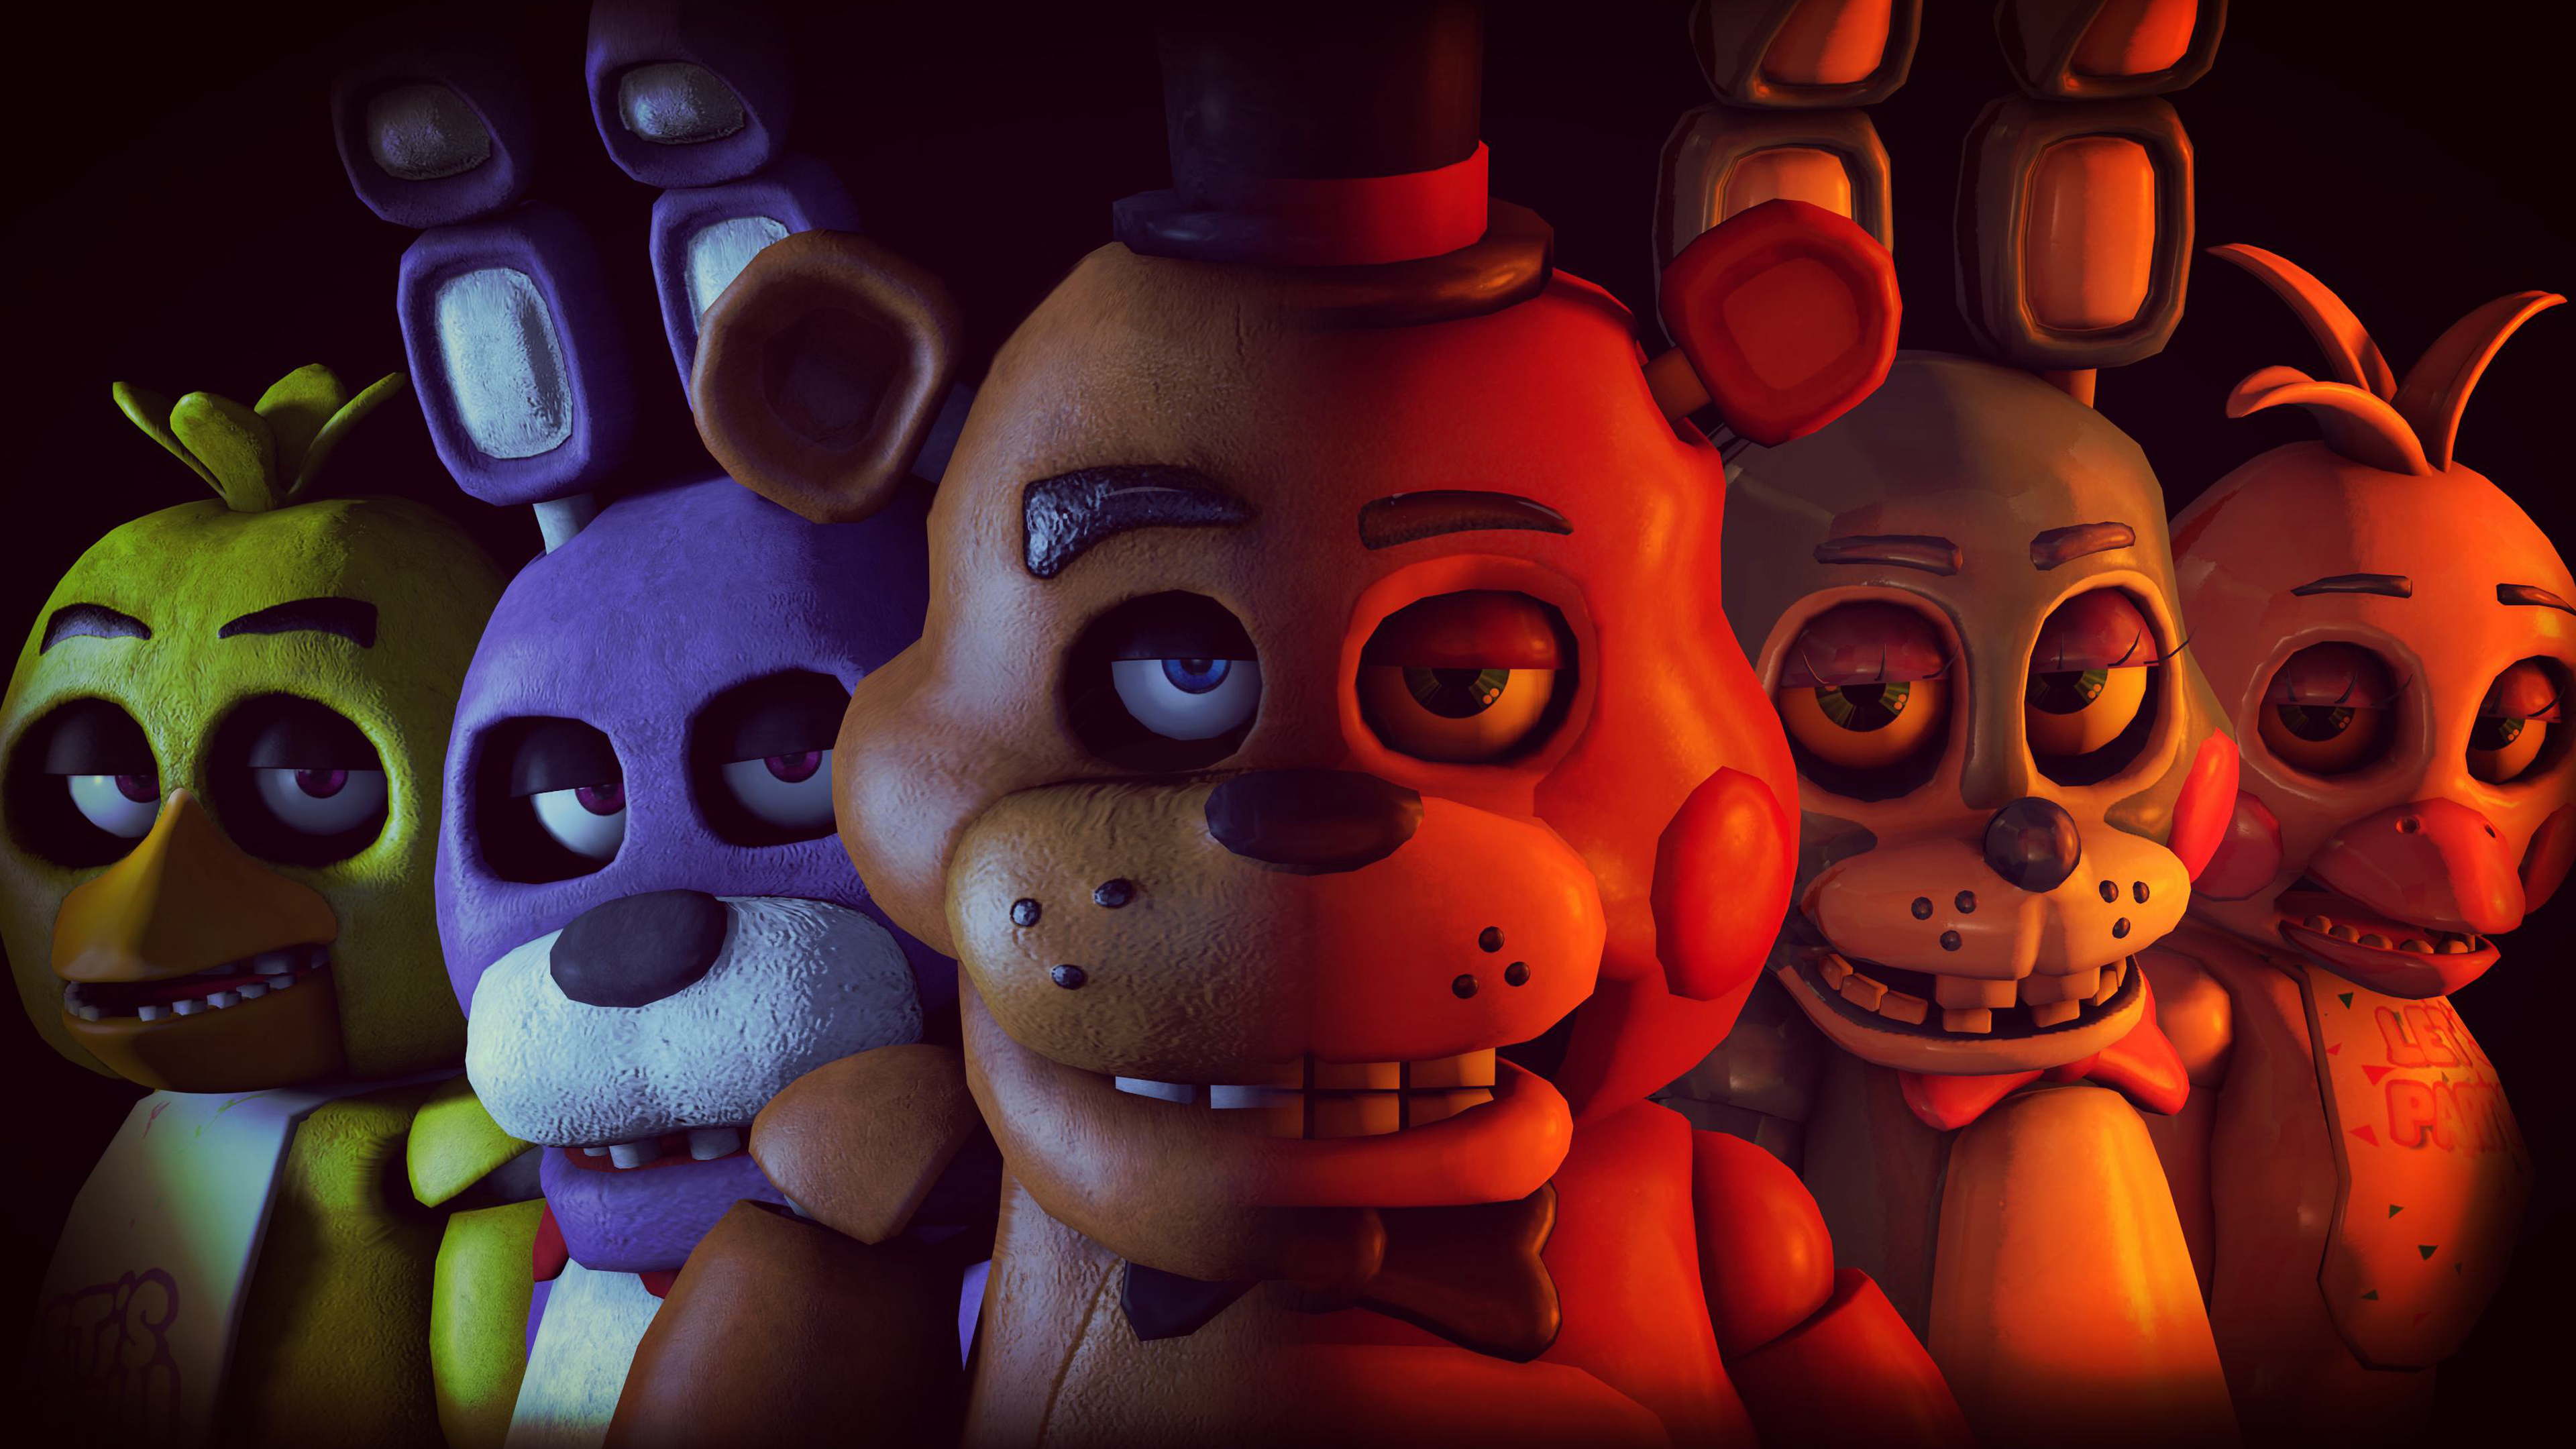 Bonnie Five Nights At Freddy 039 S Chica Five Nights At Freddy 039 S Five Nights At Freddy 039 S Fre 3840x2160